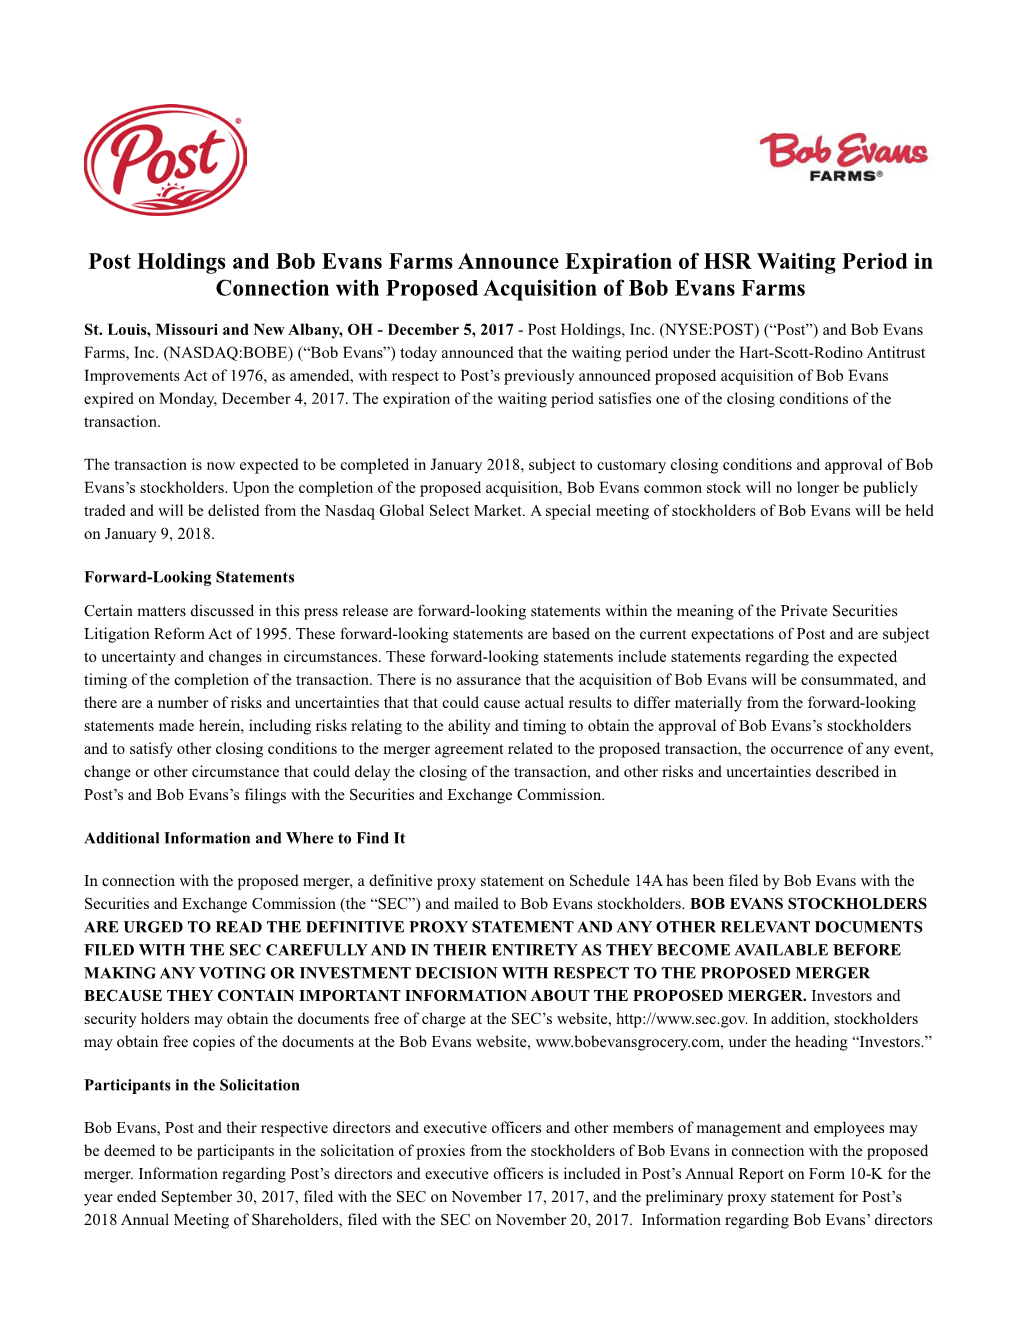 Post Holdings and Bob Evans Farms Announce Expiration of HSR Waiting Period in Connection with Proposed Acquisition of Bob Evans Farms